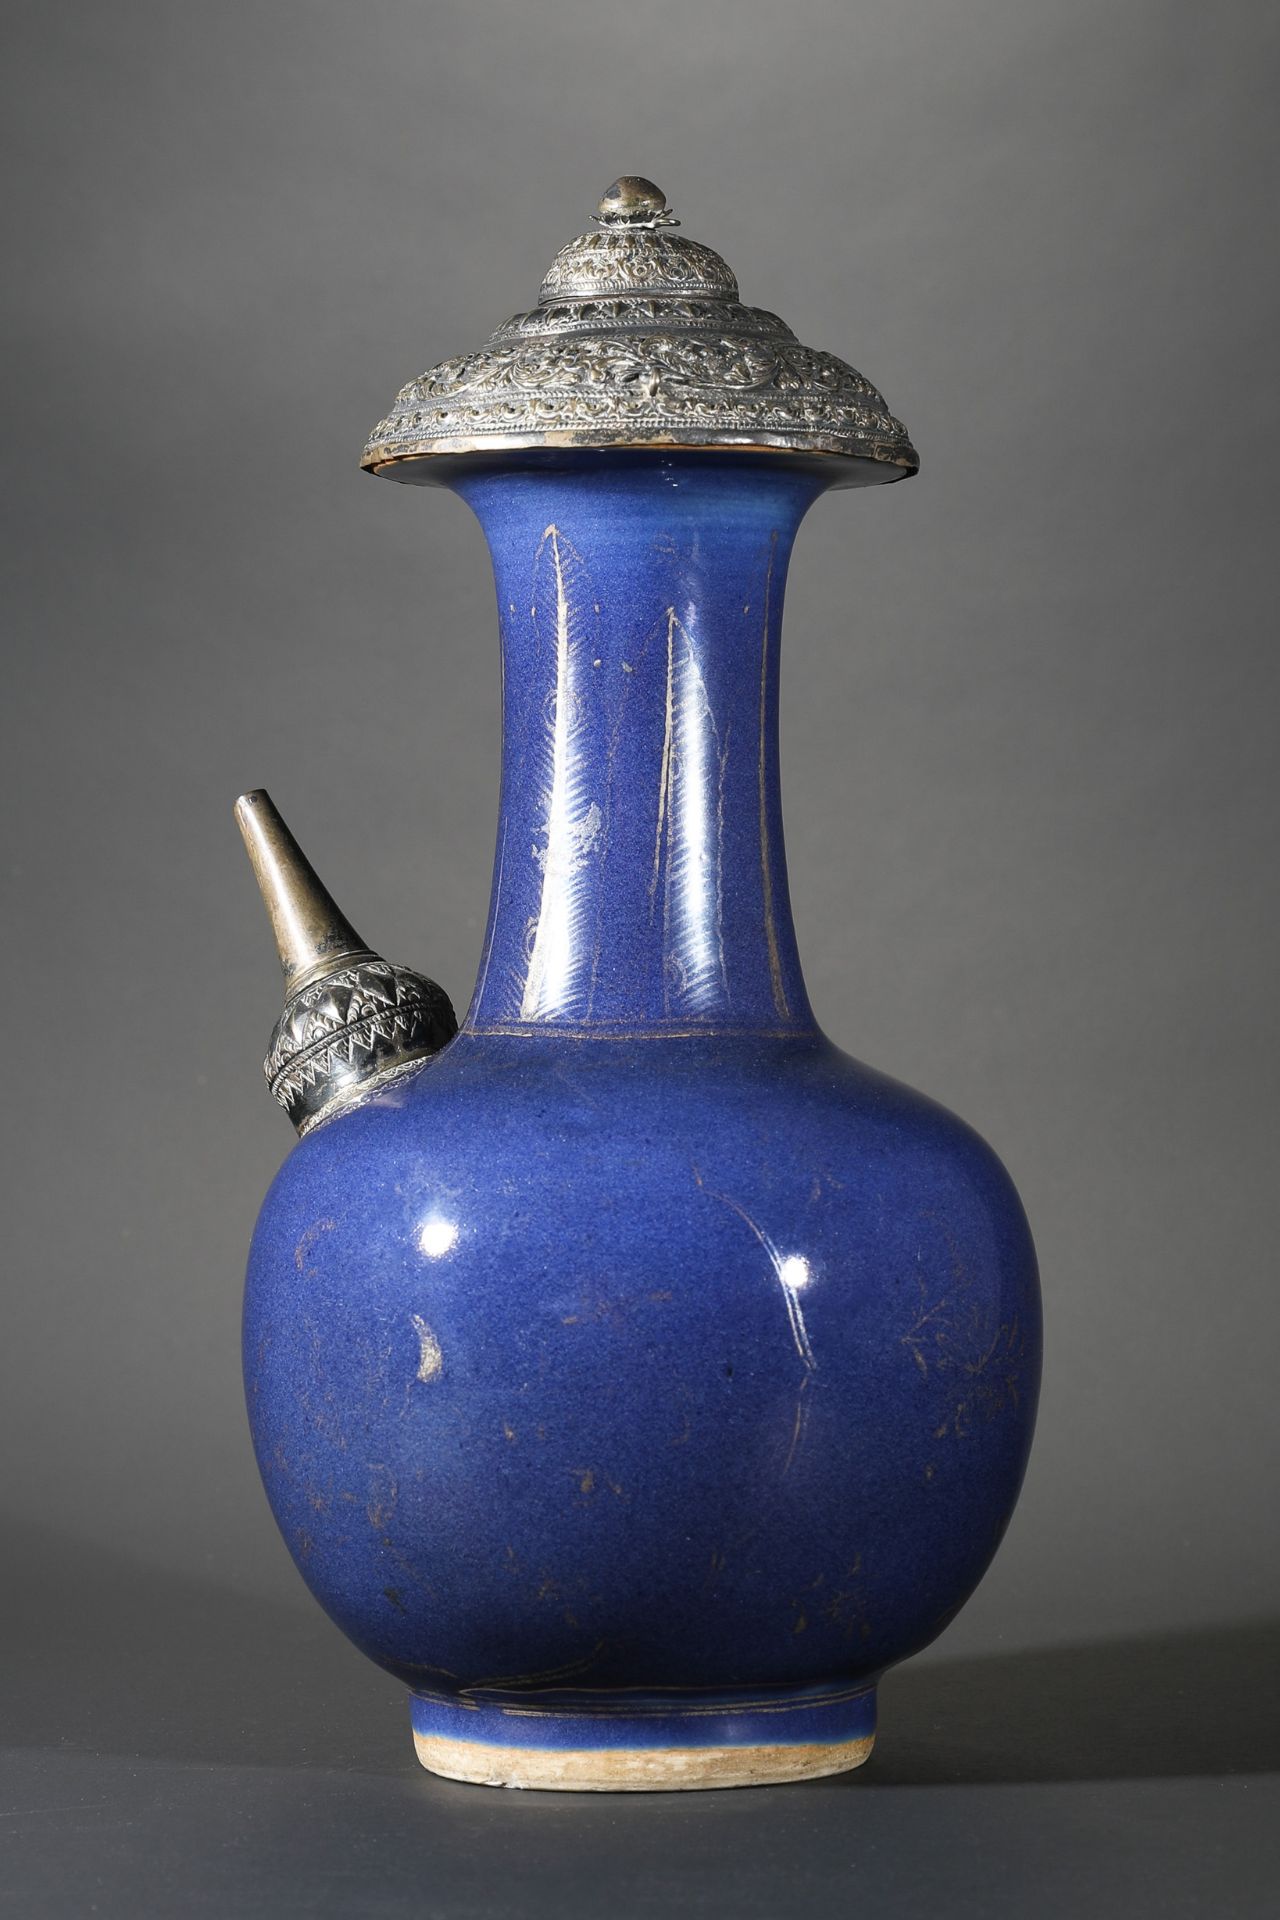 Kendi, Kangxi Period (1654-1722), powder blue with gold painting and silver mount - Image 5 of 8